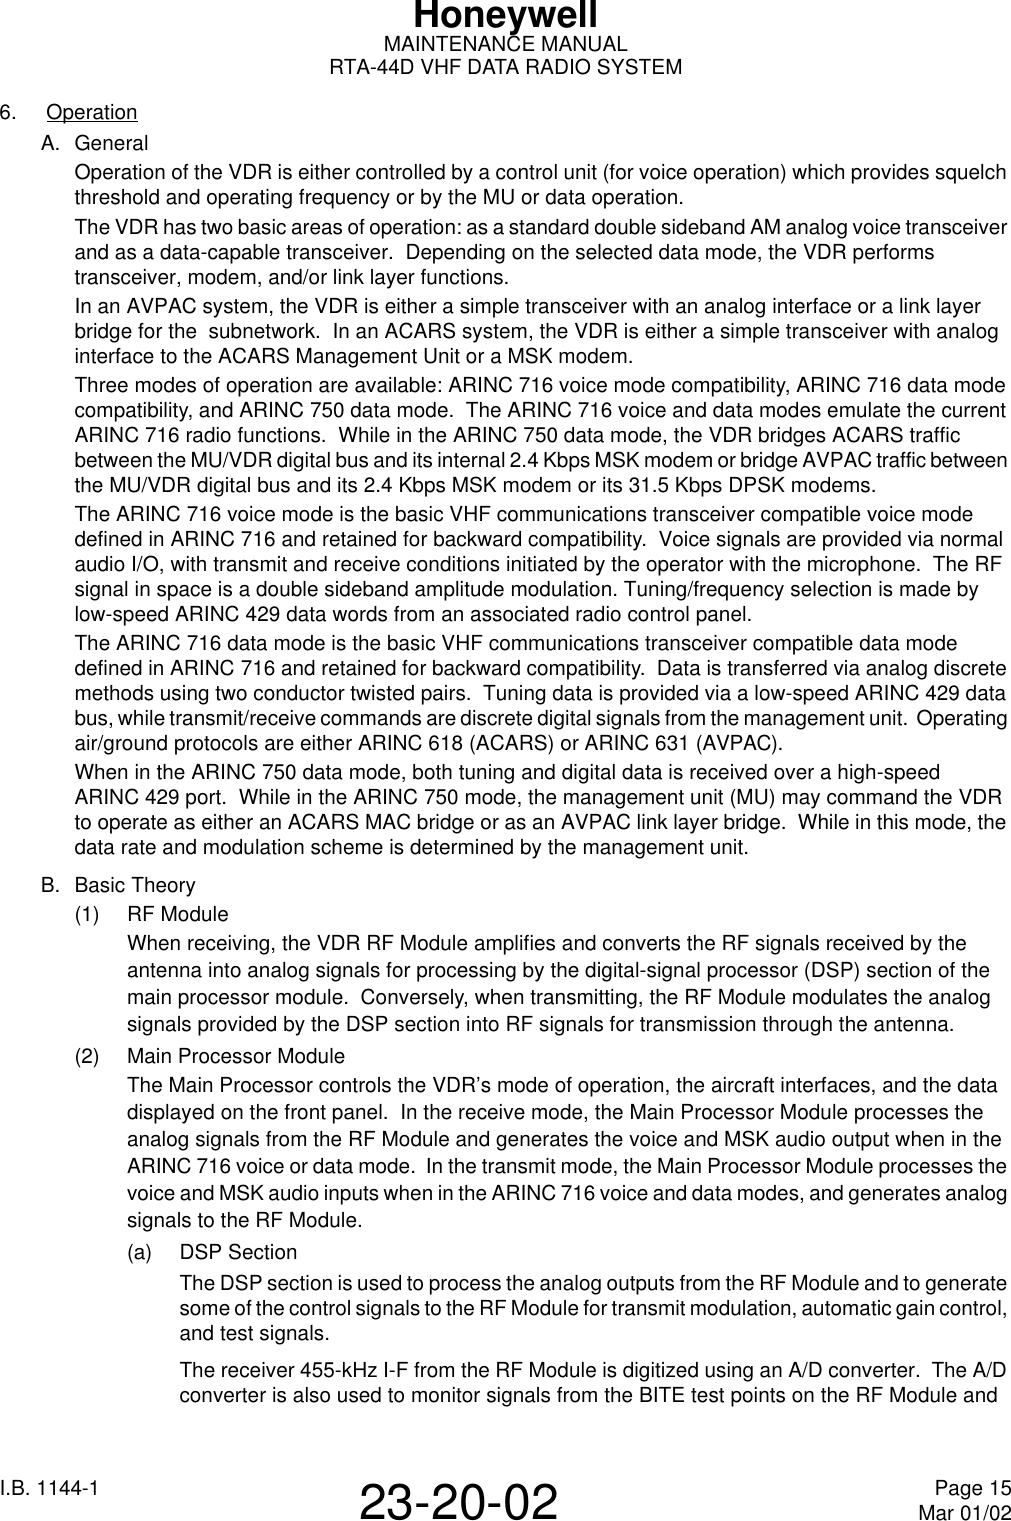 I.B. 1144-1 Page 15Mar 01/0223-20-02HoneywellMAINTENANCE MANUALRTA-44D VHF DATA RADIO SYSTEM6.  OperationA. GeneralOperation of the VDR is either controlled by a control unit (for voice operation) which provides squelch threshold and operating frequency or by the MU or data operation.The VDR has two basic areas of operation: as a standard double sideband AM analog voice transceiver and as a data-capable transceiver.  Depending on the selected data mode, the VDR performs transceiver, modem, and/or link layer functions.In an AVPAC system, the VDR is either a simple transceiver with an analog interface or a link layer bridge for the  subnetwork.  In an ACARS system, the VDR is either a simple transceiver with analog interface to the ACARS Management Unit or a MSK modem.Three modes of operation are available: ARINC716 voice mode compatibility, ARINC716 data mode compatibility, and ARINC750 data mode.  The ARINC 716 voice and data modes emulate the current ARINC716 radio functions.  While in the ARINC750 data mode, the VDR bridges ACARS traffic between the MU/VDR digital bus and its internal 2.4 Kbps MSK modem or bridge AVPAC traffic between the MU/VDR digital bus and its 2.4 Kbps MSK modem or its 31.5Kbps DPSK modems.The ARINC716 voice mode is the basic VHF communications transceiver compatible voice mode defined in ARINC716 and retained for backward compatibility.  Voice signals are provided via normal audio I/O, with transmit and receive conditions initiated by the operator with the microphone.  The RF signal in space is a double sideband amplitude modulation. Tuning/frequency selection is made by low-speed ARINC429 data words from an associated radio control panel.The ARINC716 data mode is the basic VHF communications transceiver compatible data mode defined in ARINC716 and retained for backward compatibility.  Data is transferred via analog discrete methods using two conductor twisted pairs.  Tuning data is provided via a low-speed ARINC429 data bus, while transmit/receive commands are discrete digital signals from the management unit.  Operating air/ground protocols are either ARINC618 (ACARS) or ARINC631 (AVPAC).When in the ARINC750 data mode, both tuning and digital data is received over a high-speed ARINC429 port.  While in the ARINC750 mode, the management unit (MU) may command the VDR to operate as either an ACARS MAC bridge or as an AVPAC link layer bridge.  While in this mode, the data rate and modulation scheme is determined by the management unit.B. Basic Theory(1) RF ModuleWhen receiving, the VDR RF Module amplifies and converts the RF signals received by the antenna into analog signals for processing by the digital-signal processor (DSP) section of the main processor module.  Conversely, when transmitting, the RF Module modulates the analog signals provided by the DSP section into RF signals for transmission through the antenna.(2) Main Processor ModuleThe Main Processor controls the VDR’s mode of operation, the aircraft interfaces, and the data displayed on the front panel.  In the receive mode, the Main Processor Module processes the analog signals from the RF Module and generates the voice and MSK audio output when in the ARINC 716 voice or data mode.  In the transmit mode, the Main Processor Module processes the voice and MSK audio inputs when in the ARINC 716 voice and data modes, and generates analog signals to the RF Module.(a) DSP SectionThe DSP section is used to process the analog outputs from the RF Module and to generate some of the control signals to the RF Module for transmit modulation, automatic gain control, and test signals.The receiver 455-kHz I-F from the RF Module is digitized using an A/D converter.  The A/D converter is also used to monitor signals from the BITE test points on the RF Module and 